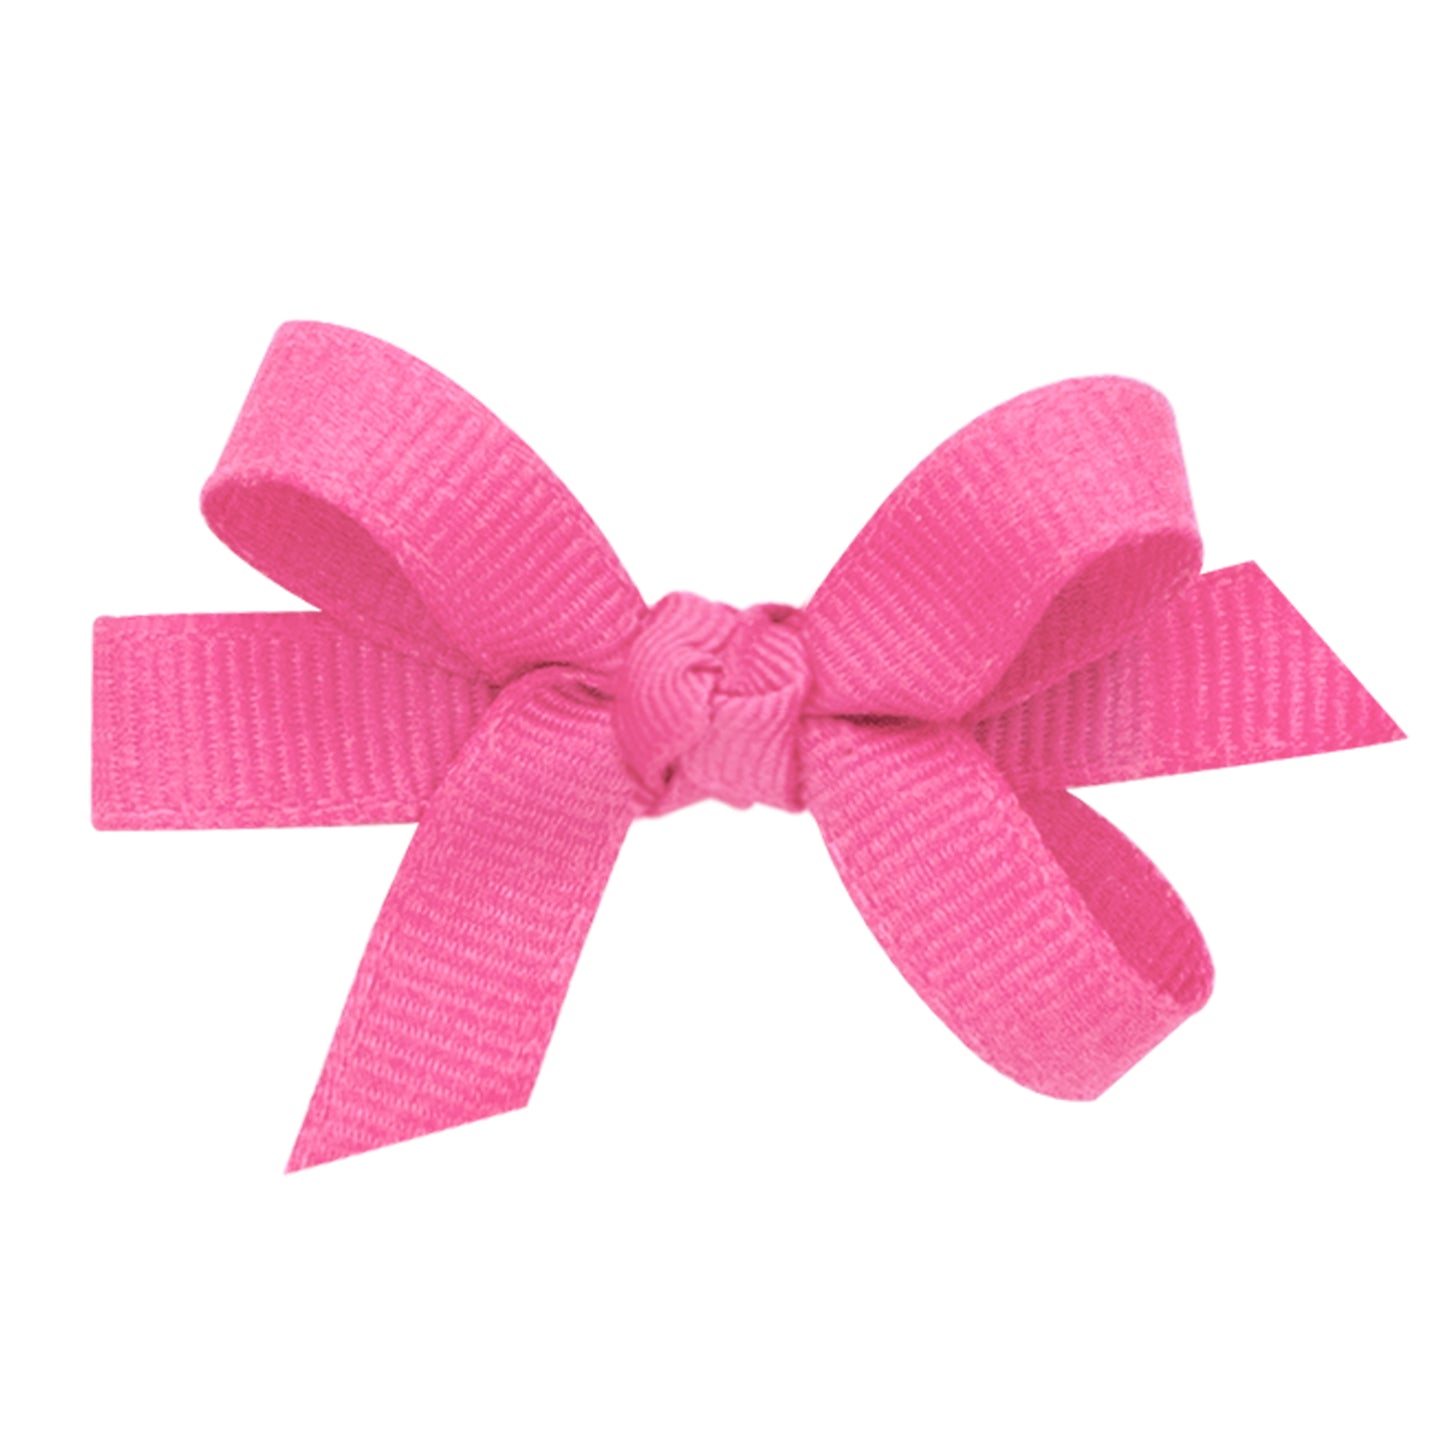 Sweet Baby Grosgrain Bow with Center Knot - Hot Pink